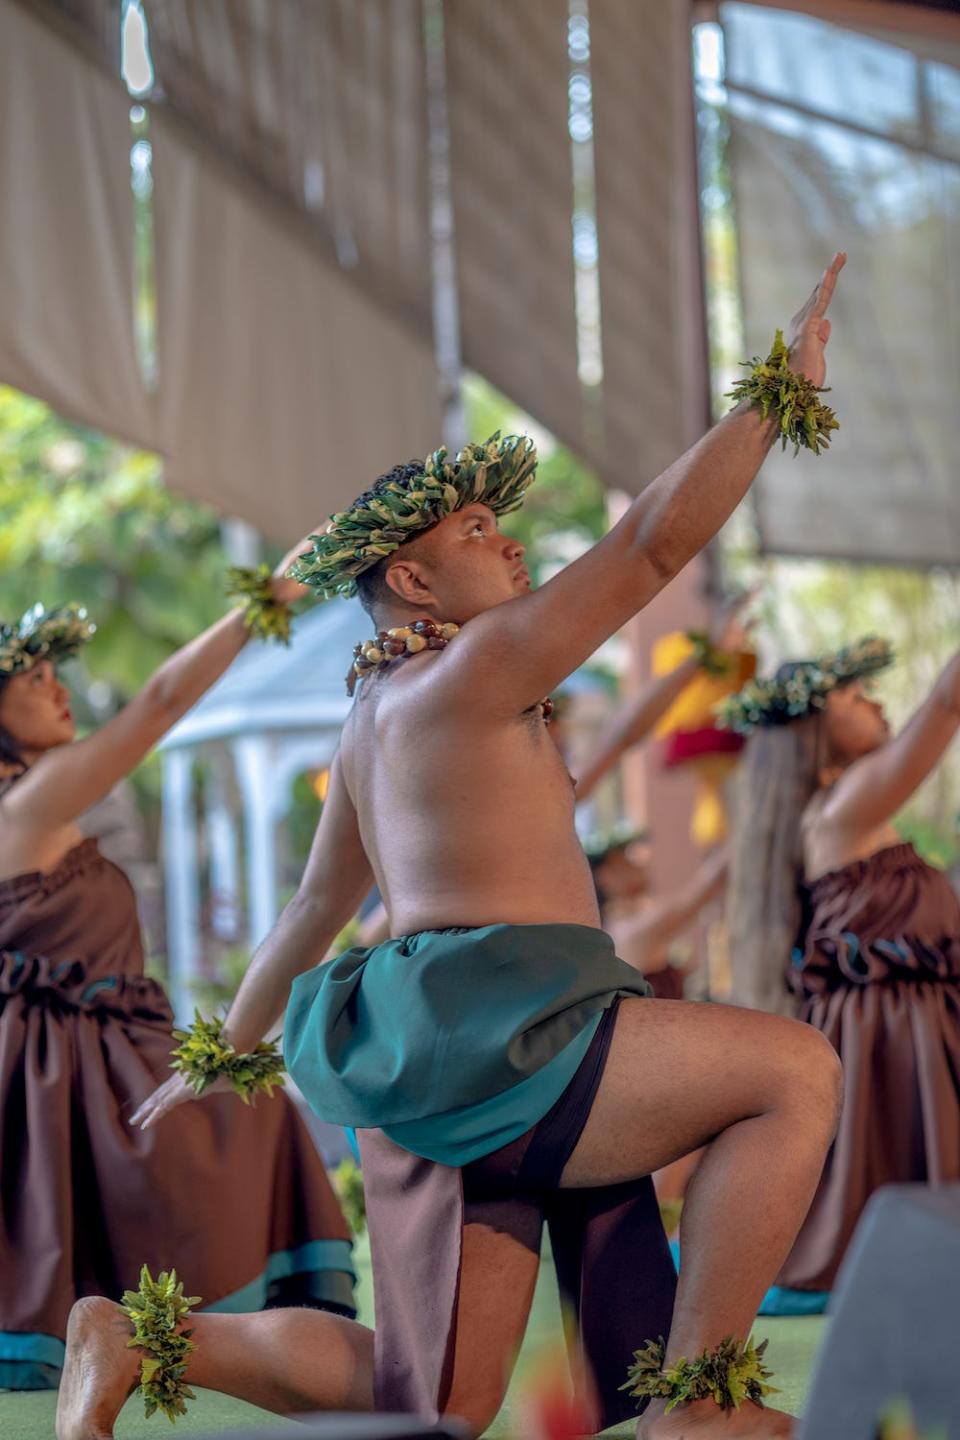 The luau also features hula kahiko, the older, more traditional style of hula that includes chanting and percussion instruments.